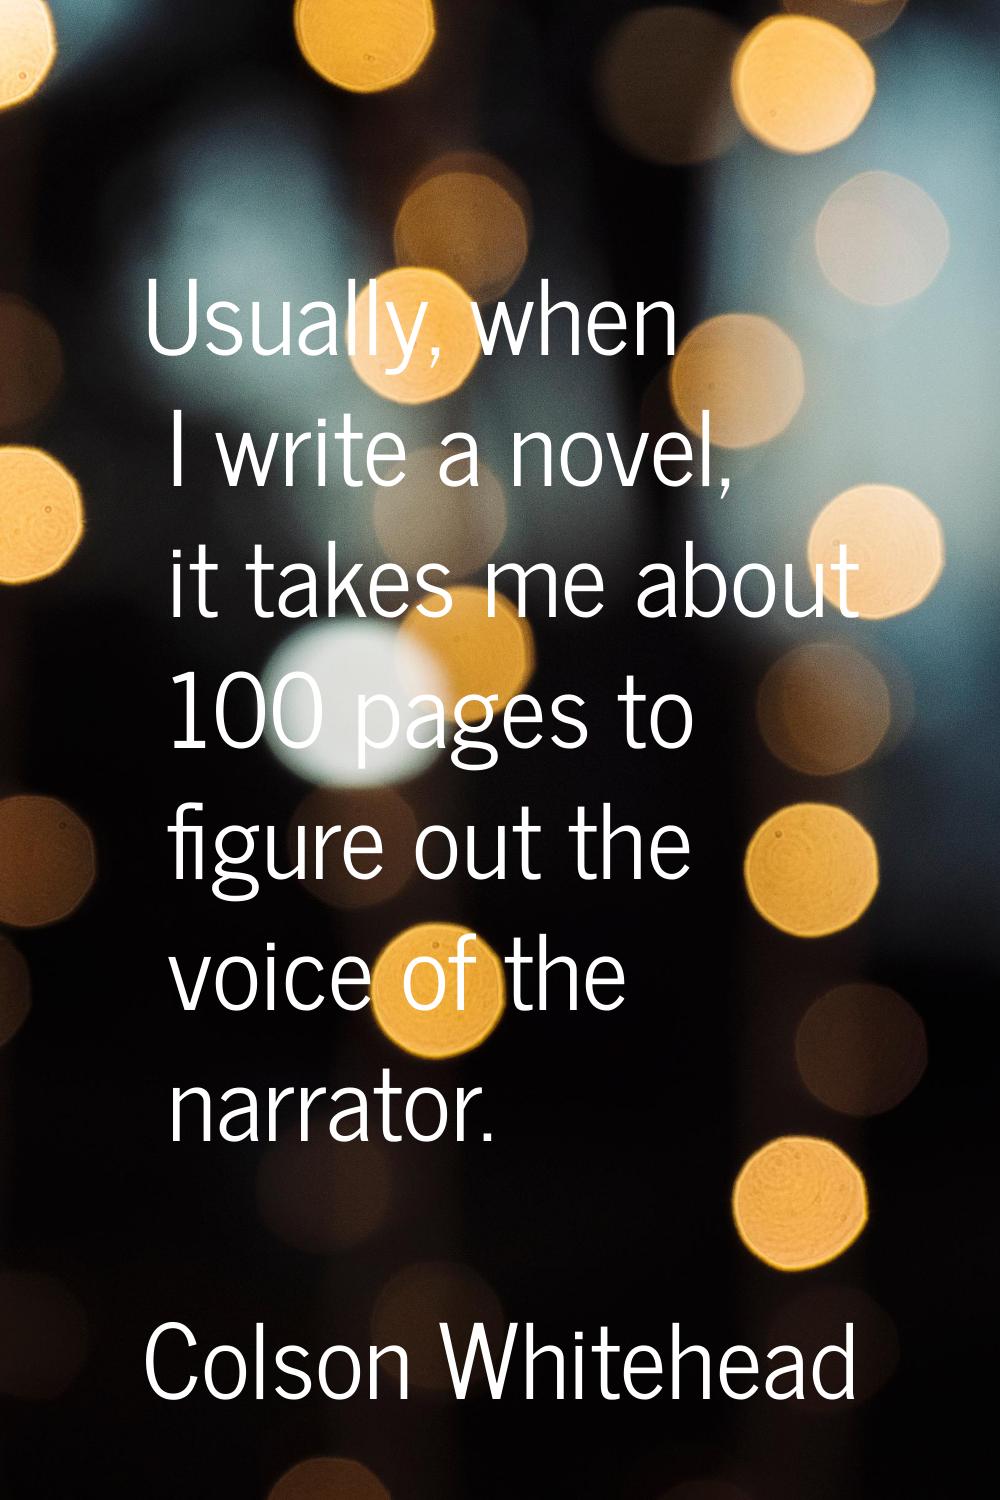 Usually, when I write a novel, it takes me about 100 pages to figure out the voice of the narrator.